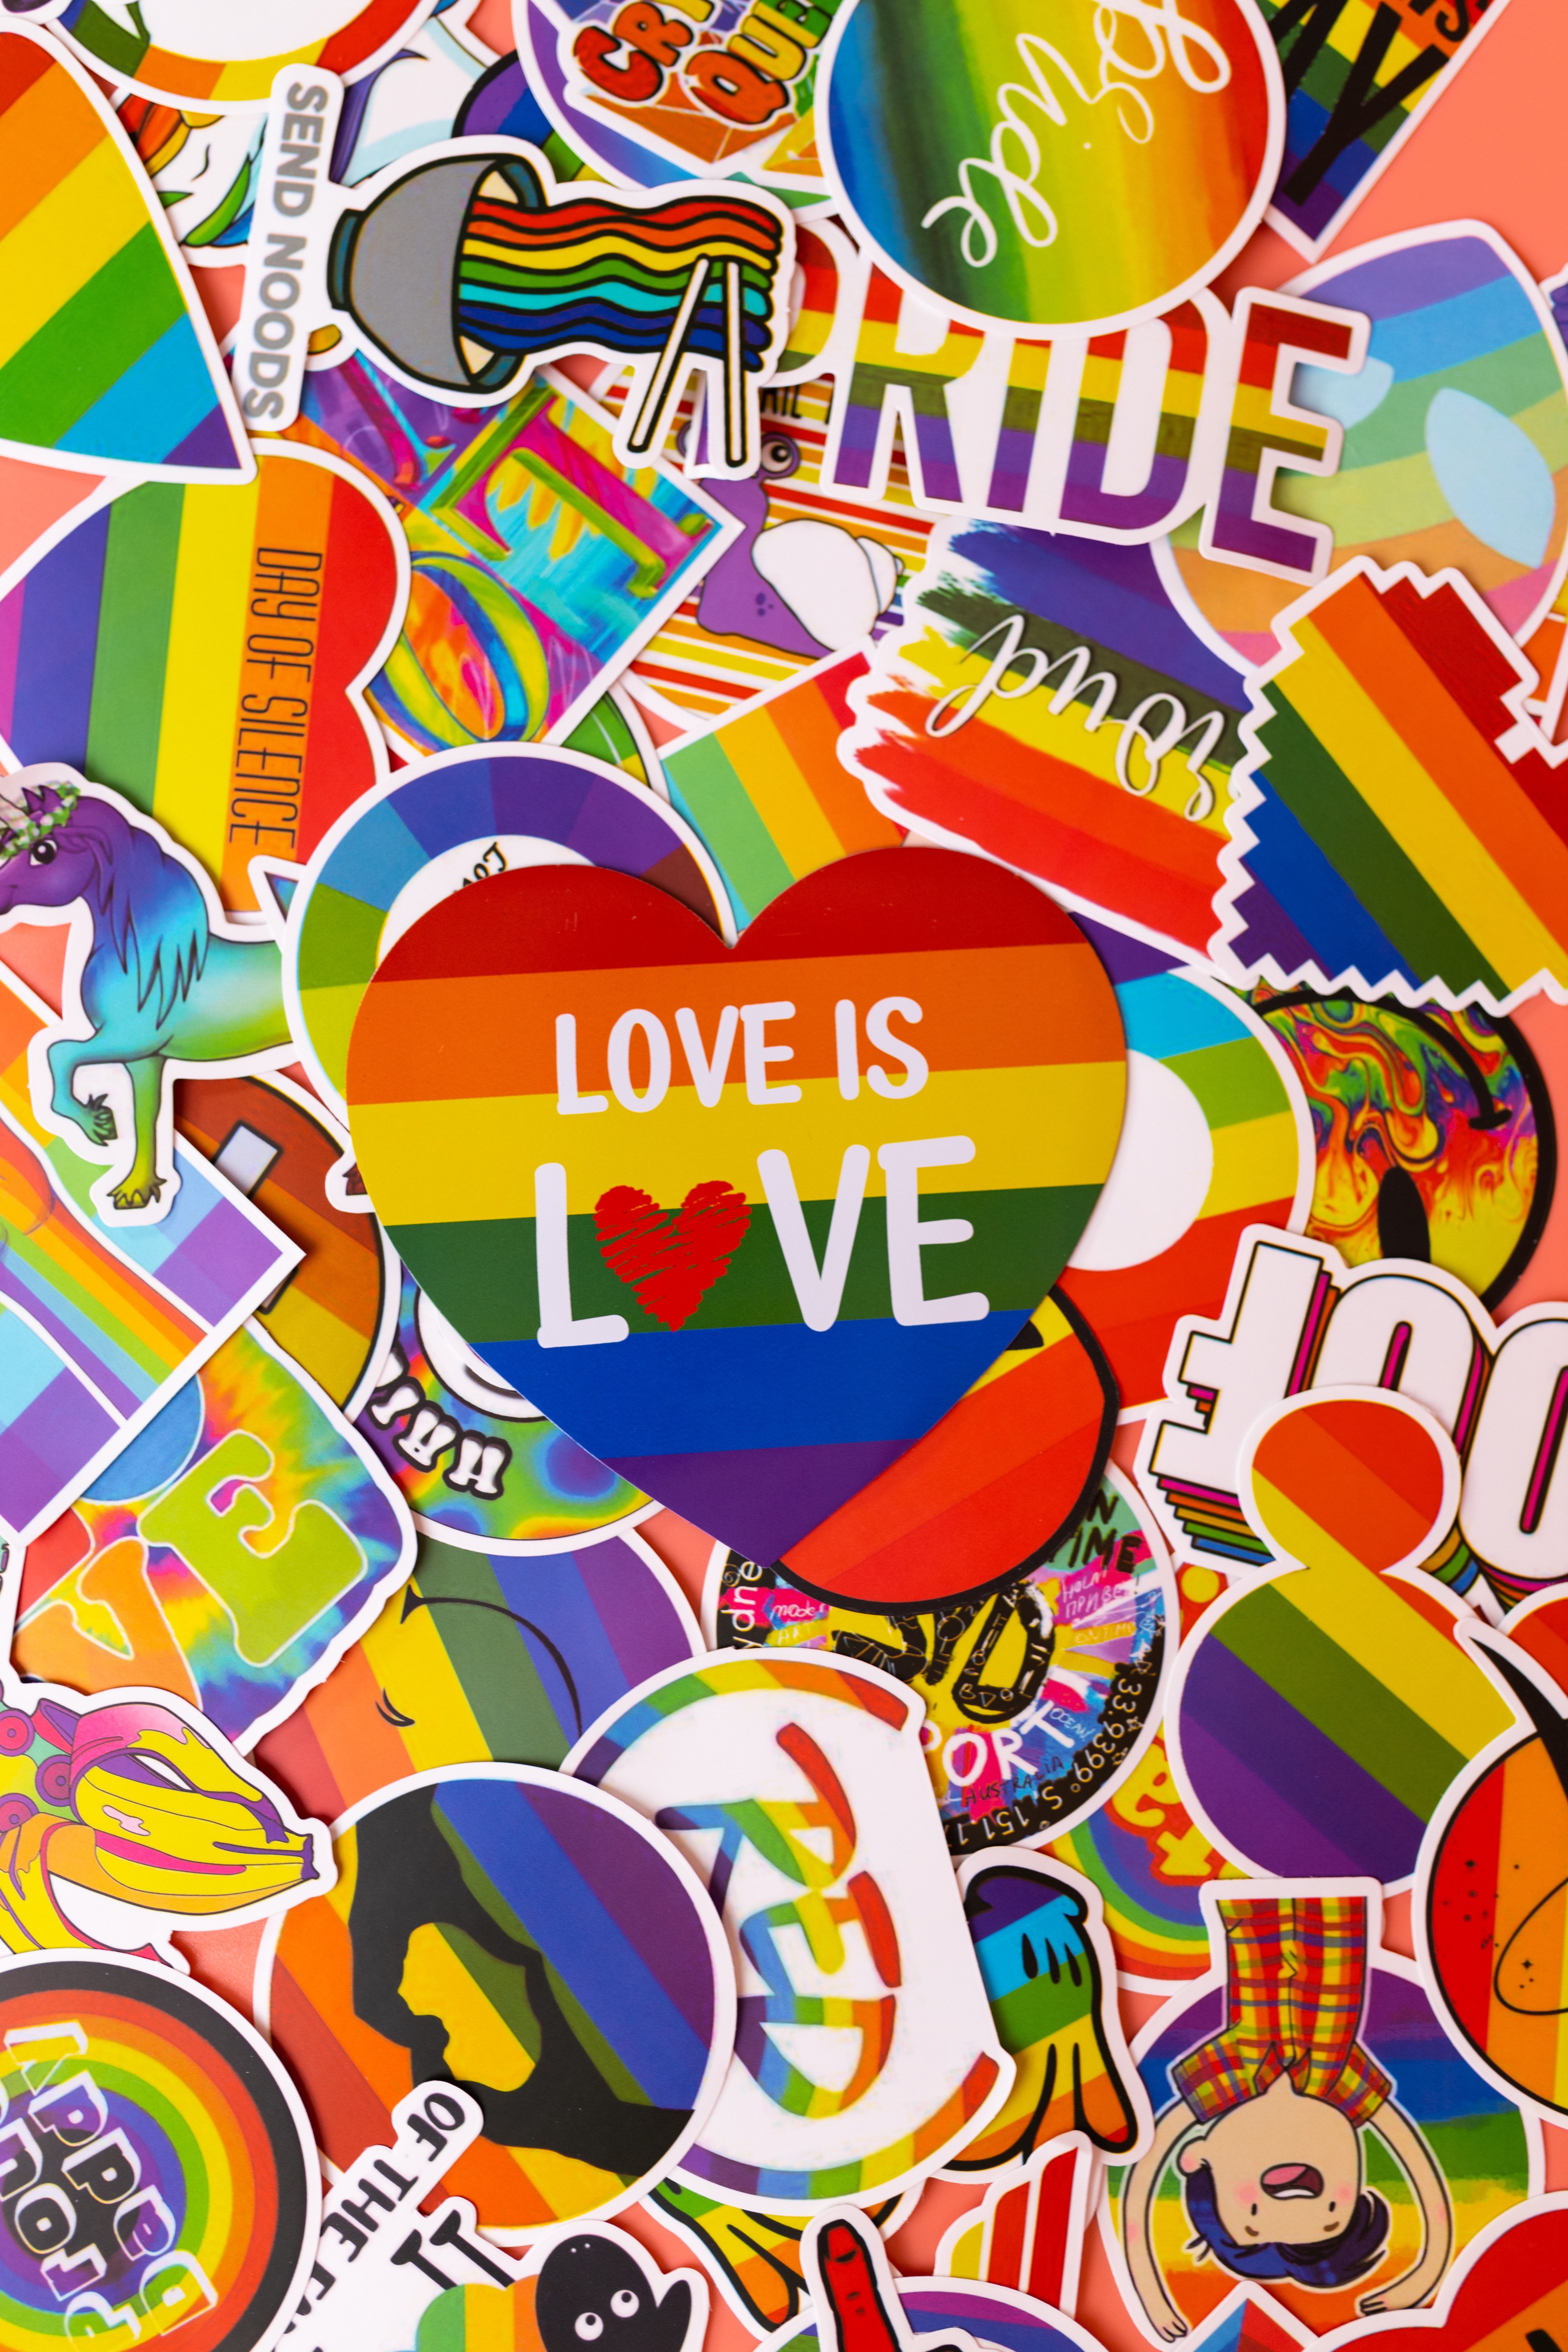 LGBT Emblems Pins and Labels with Slogans of Love and Pride · Free